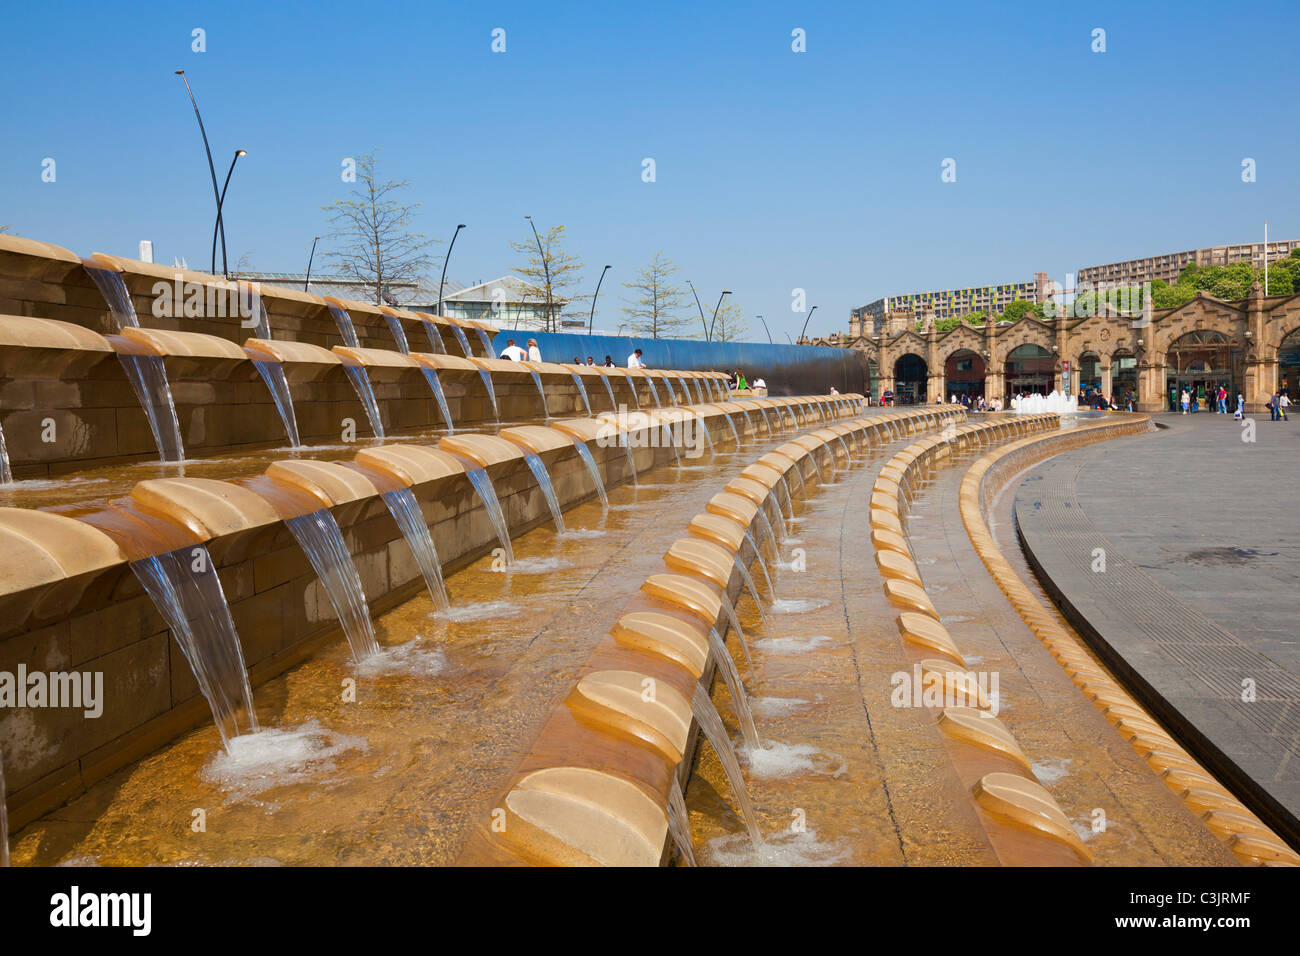 The Fountain in Sheaf Square outside Sheffield railway station South Yorkshire England GB UK EU Europe Stock Photo